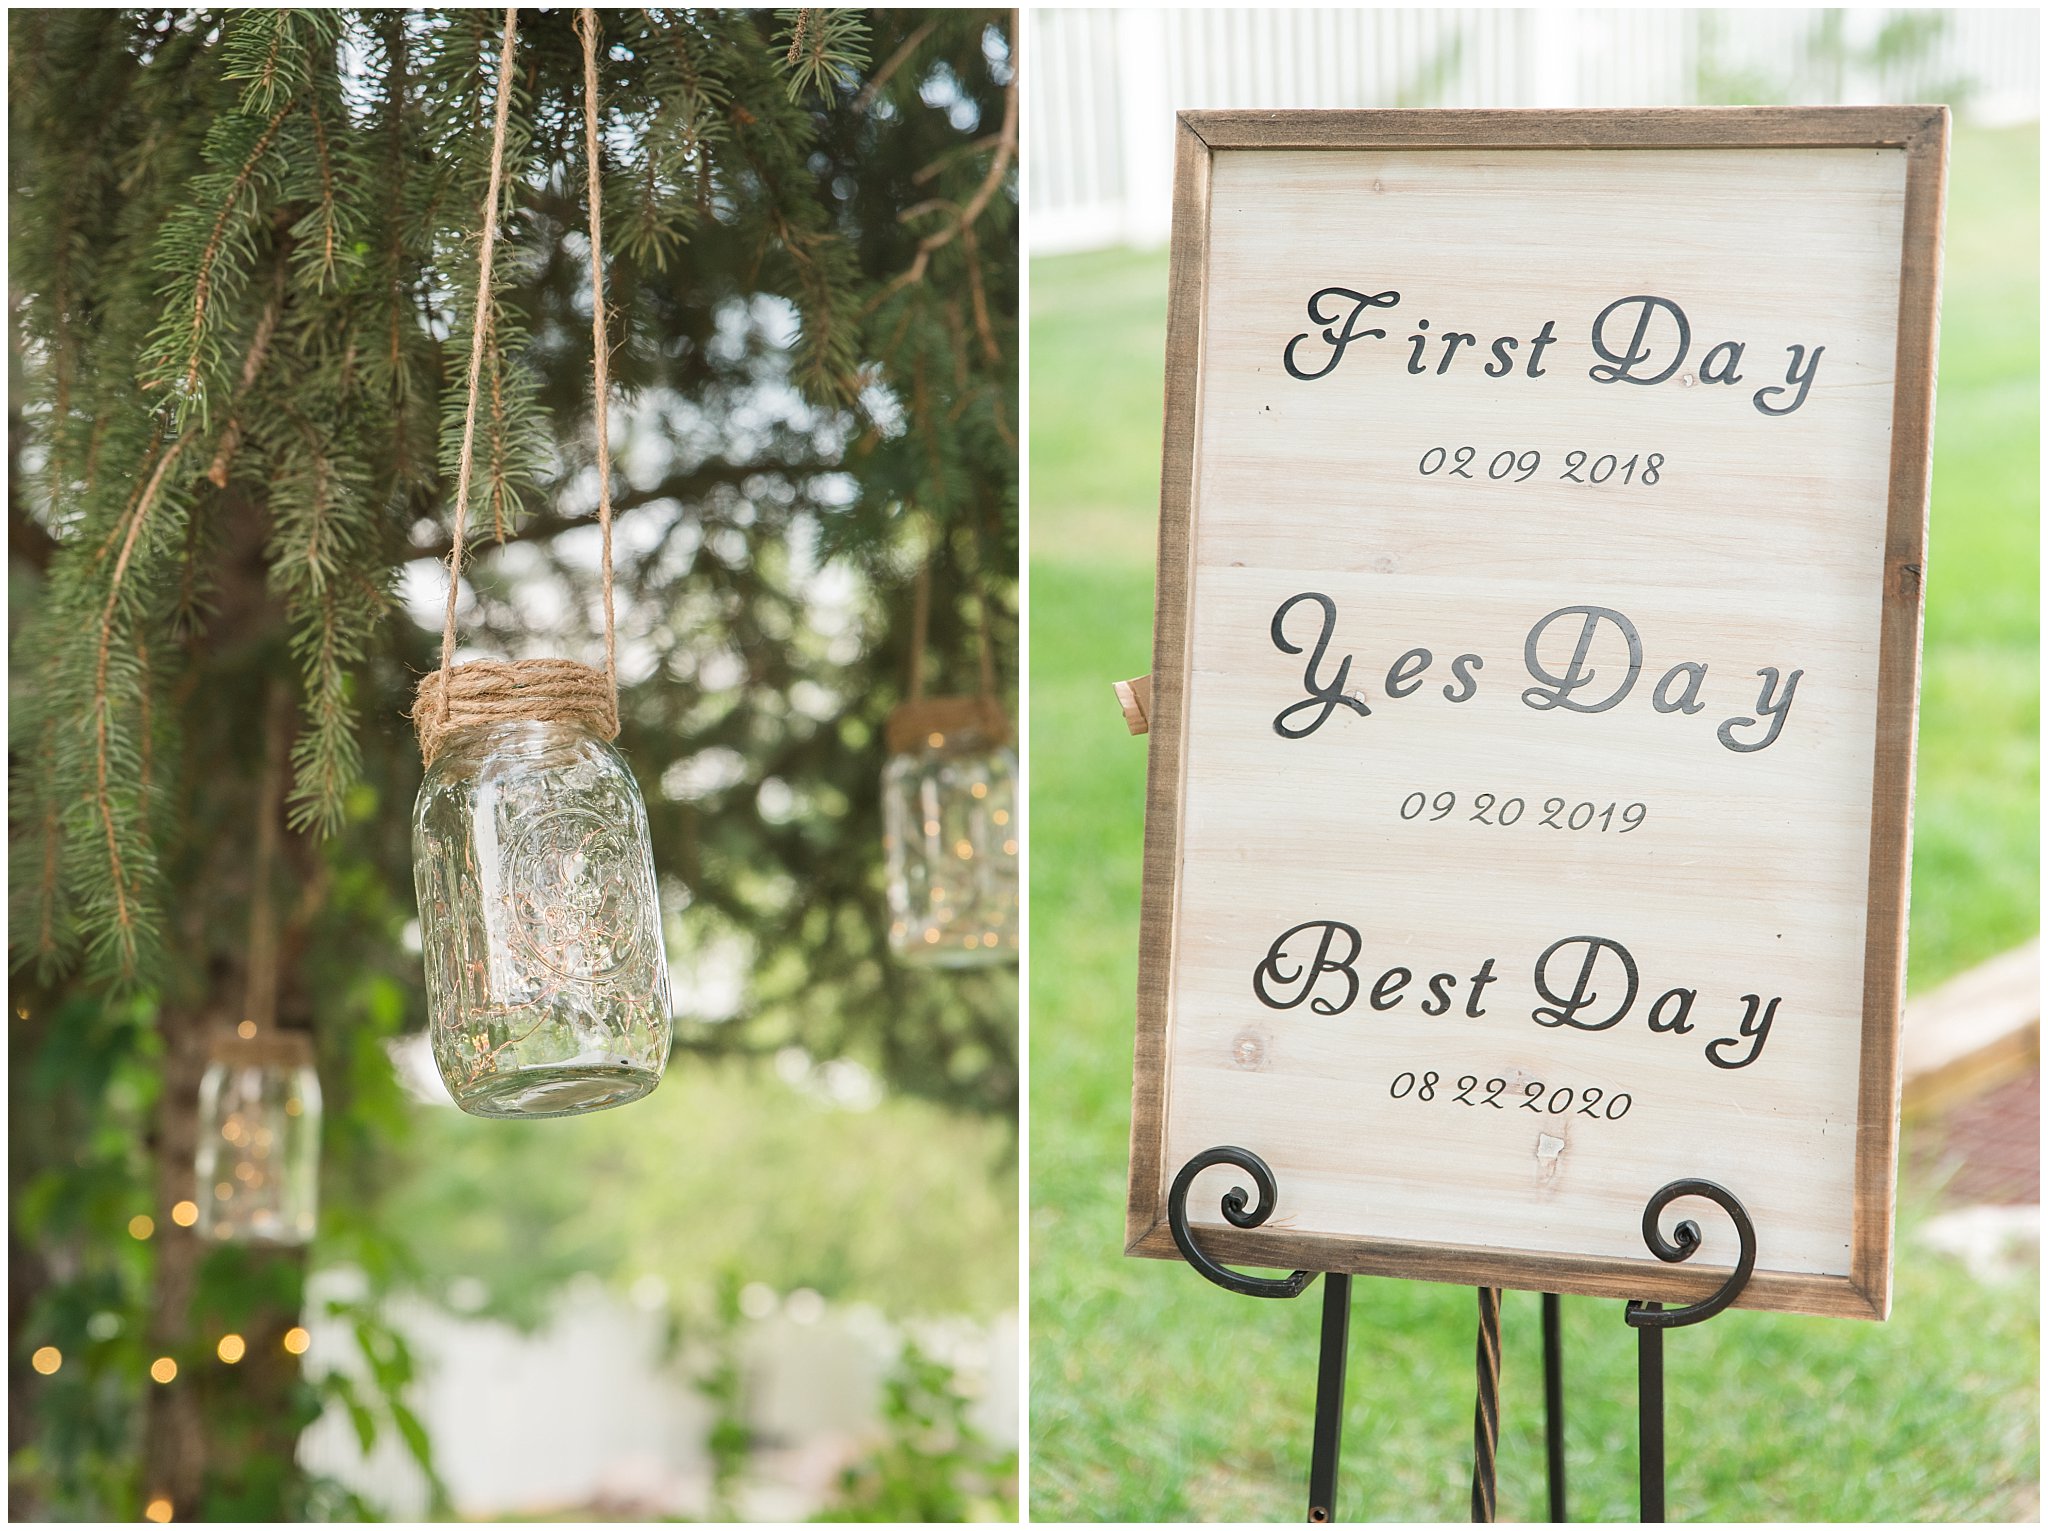 Mason jars with lights hanging in trees and Wedding first day, date, and best day sign | Dusty Blue and Rose Summer Wedding at Oak Hills Utah | Jessie and Dallin Photography